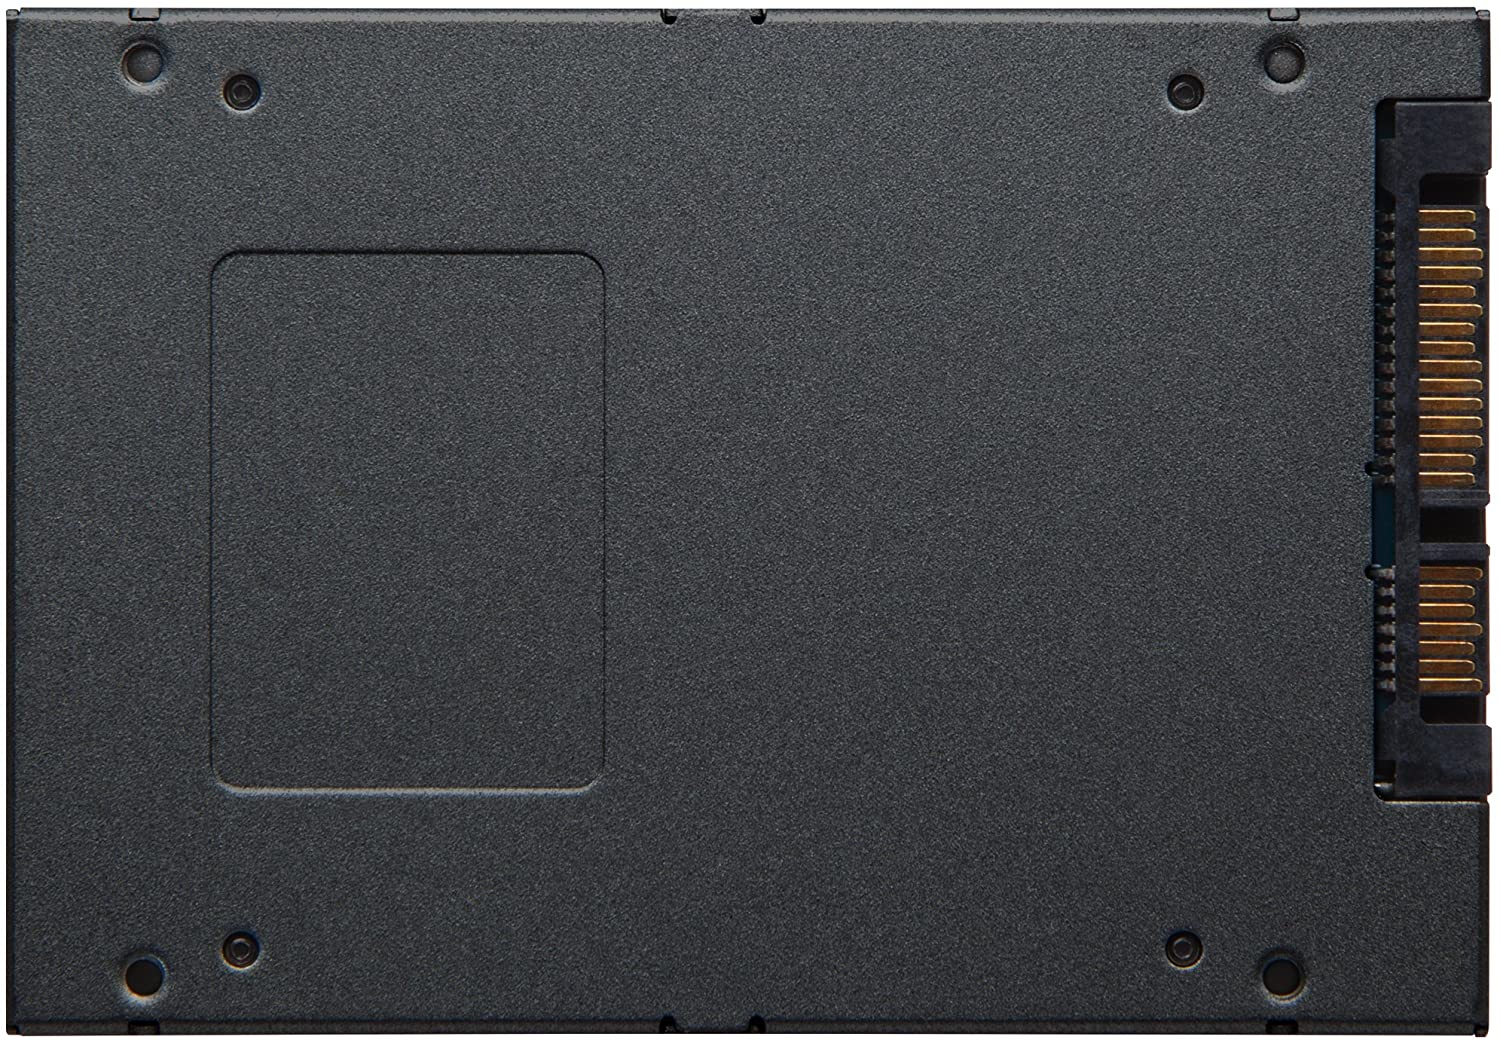 480 GB SOLID STATE DRIVE SSD